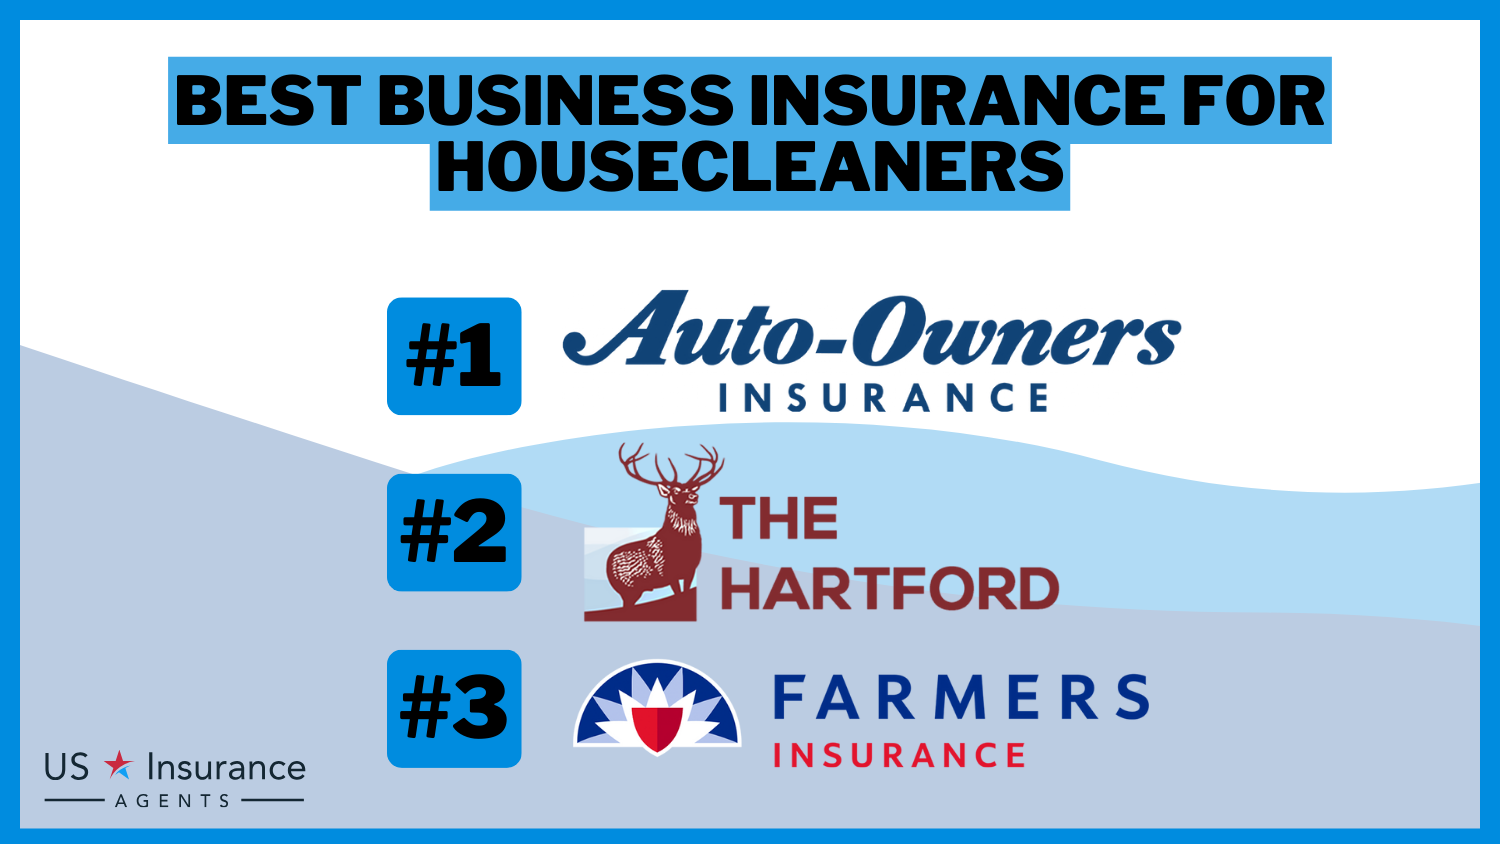 Auto Owners, The Hartford, Farmers: Best Business Insurance for Housecleaners